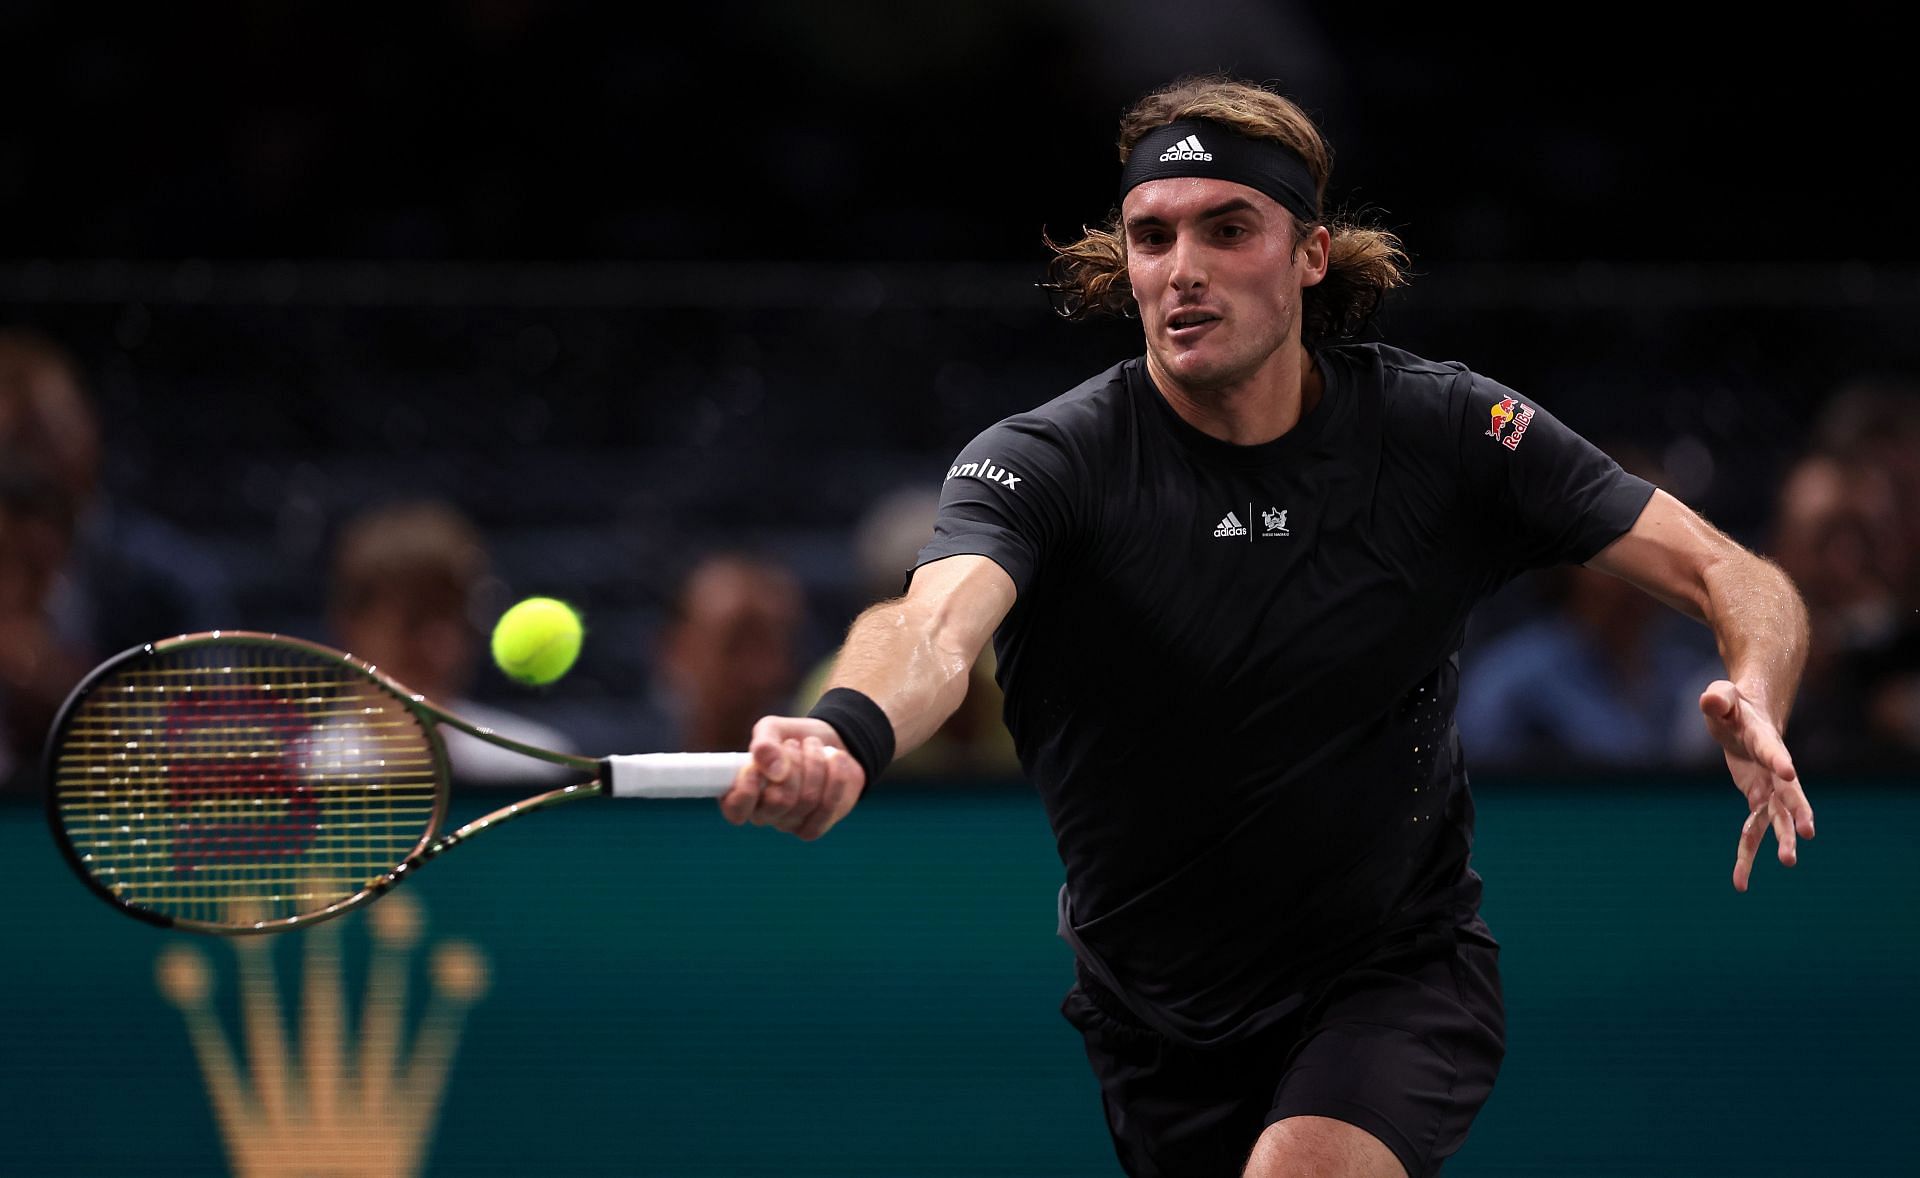 Stefanos Tsitsipas in action at the Rolex Paris Masters.